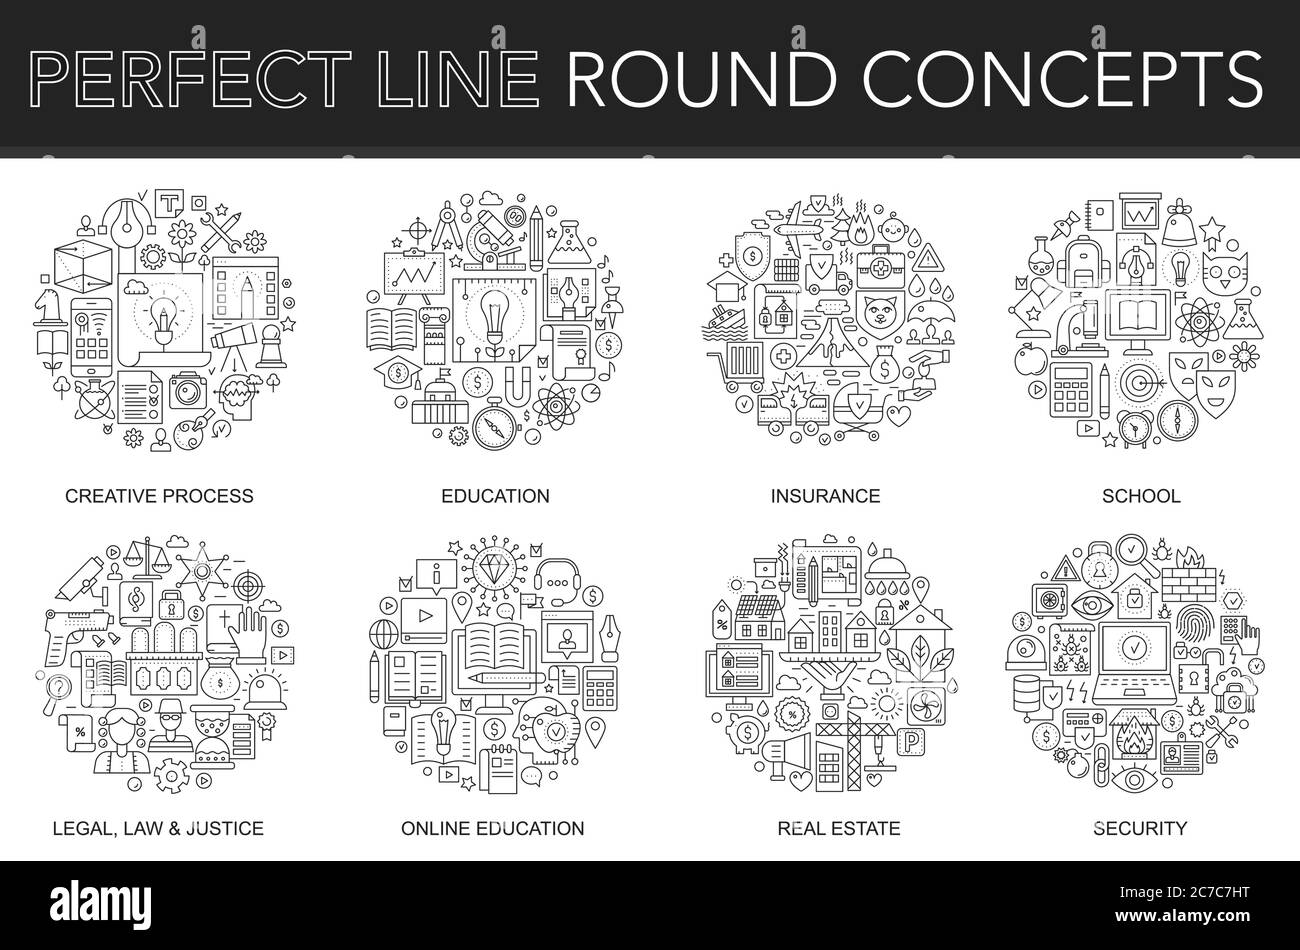 Round outline concept of creative process, insurance, school, legal, law and justice, online education, real estate, security icons. Thin line vector icons set for cover, emblem, flyers, posters Stock Vector